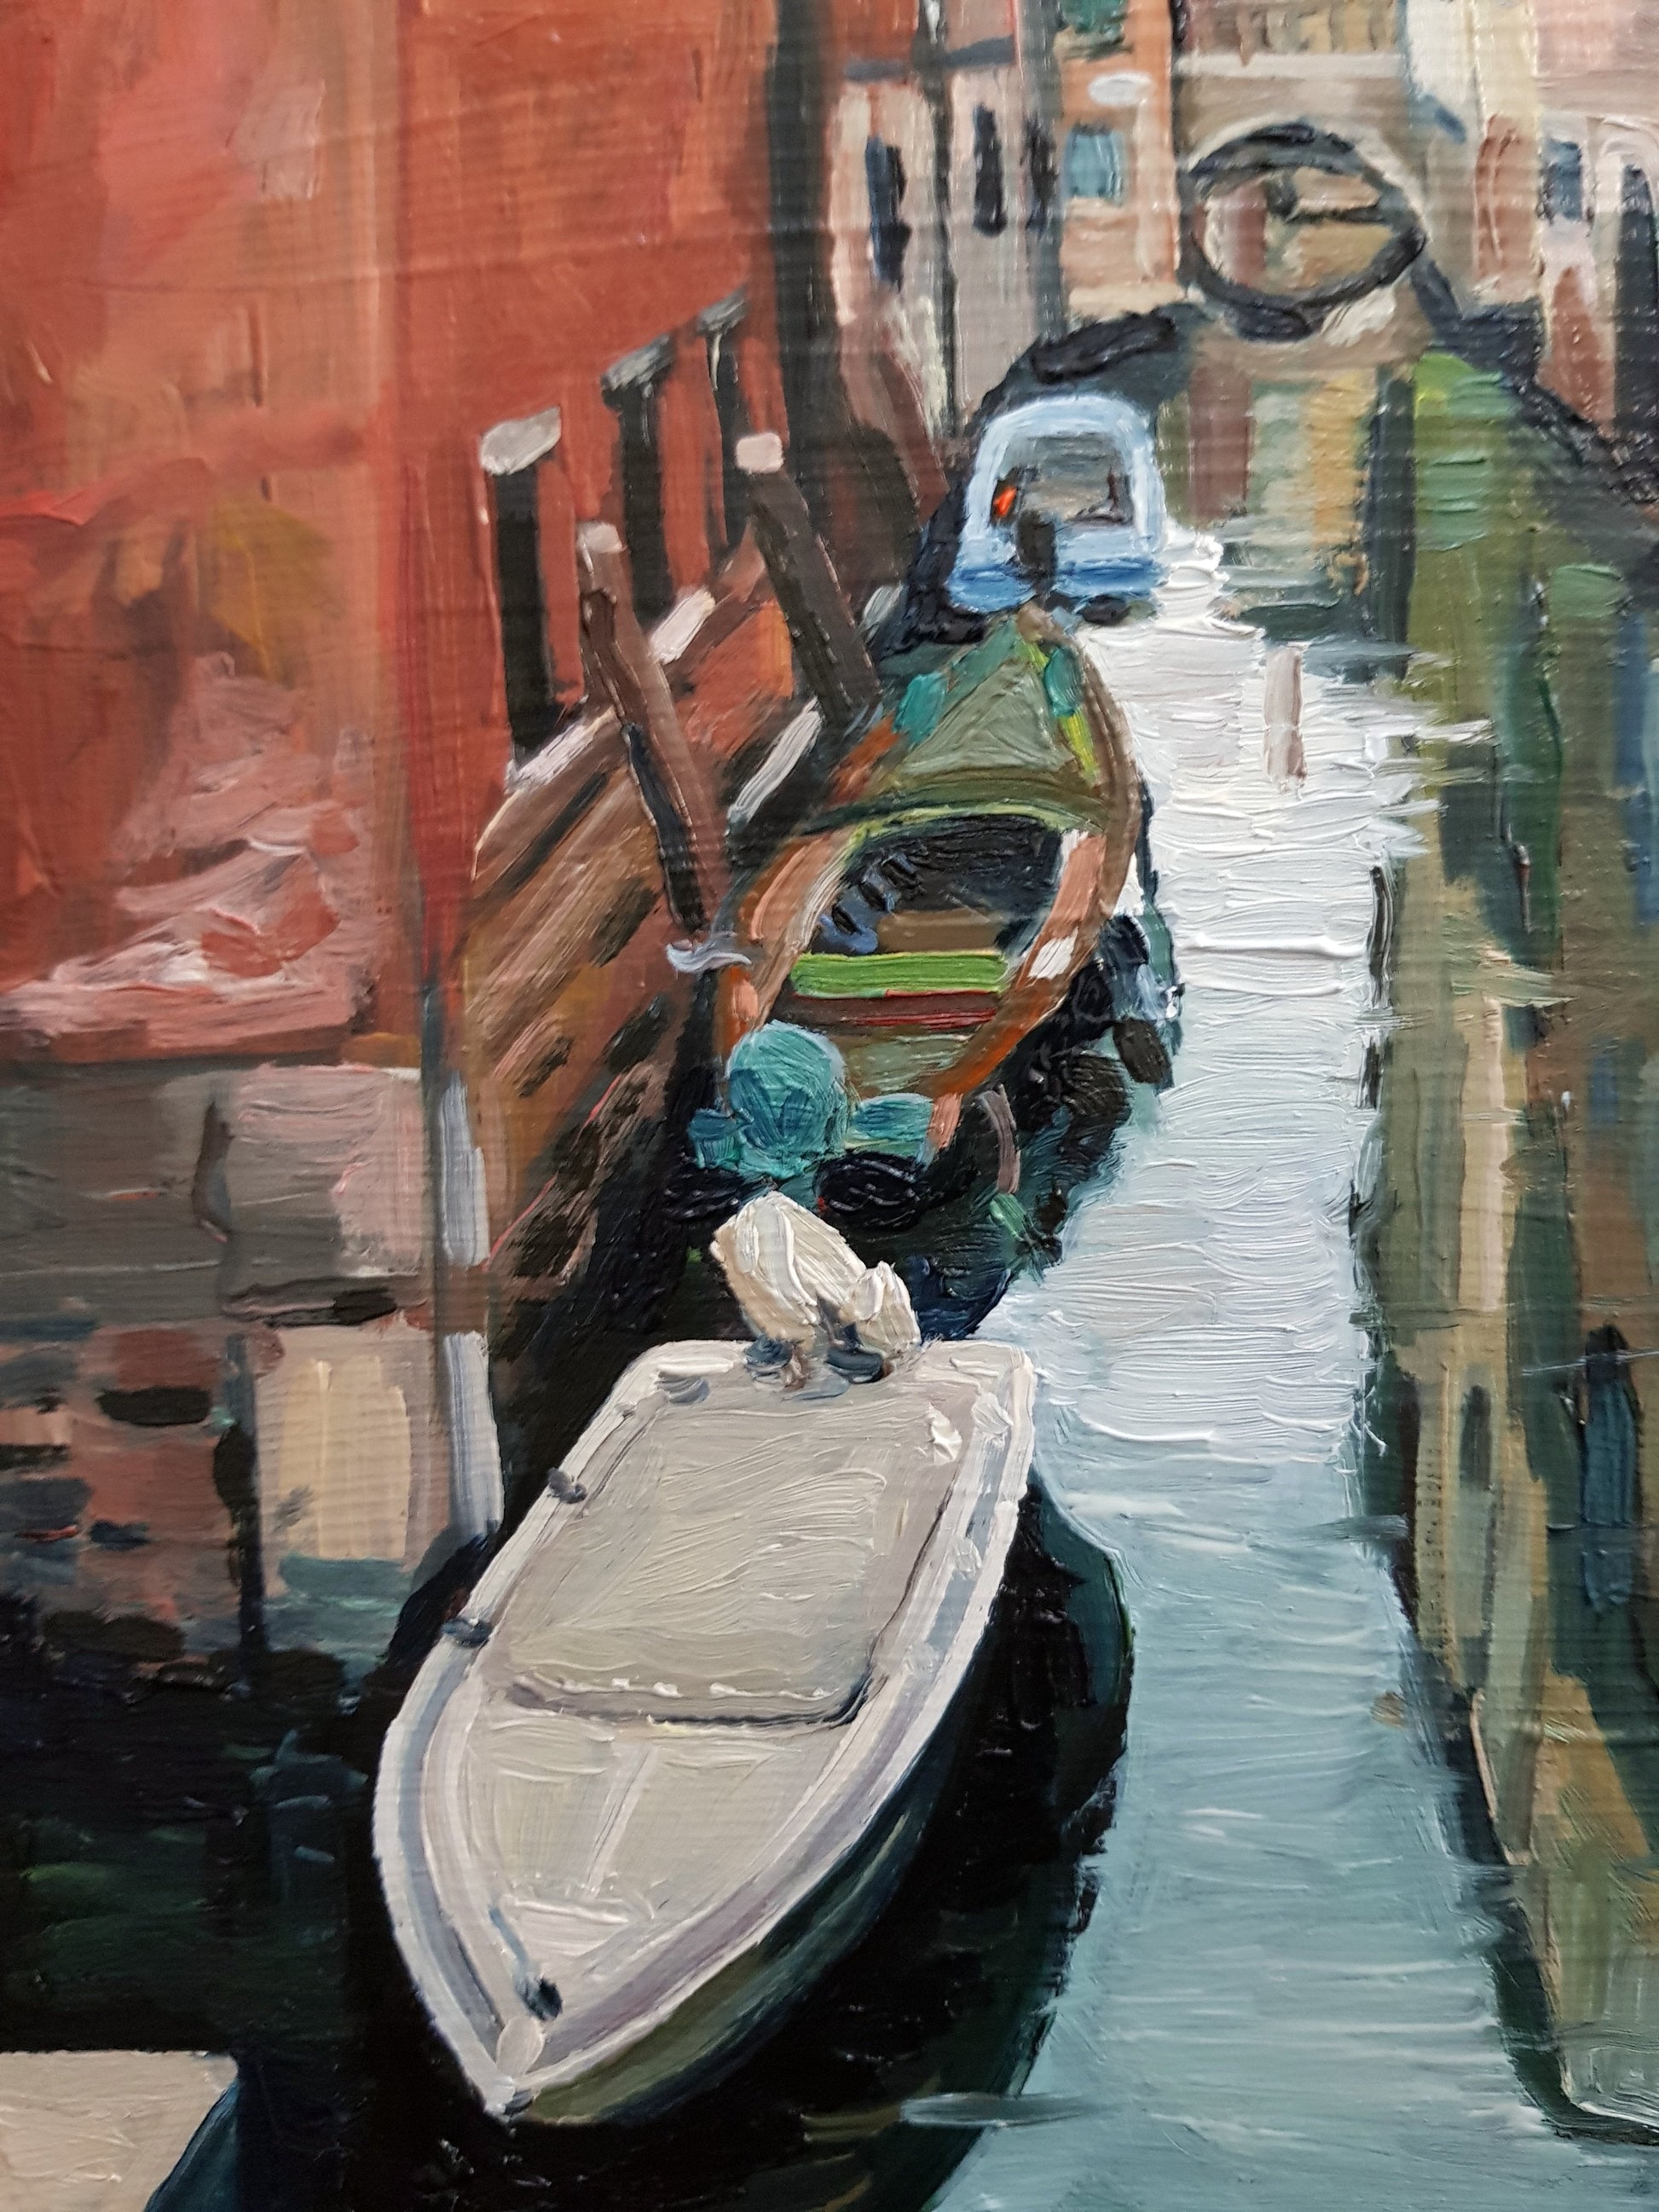 Venetian Tranquility; Autumn Morning on the Canals | Original Painting Original Paintings Harriet Lawless Artist italy